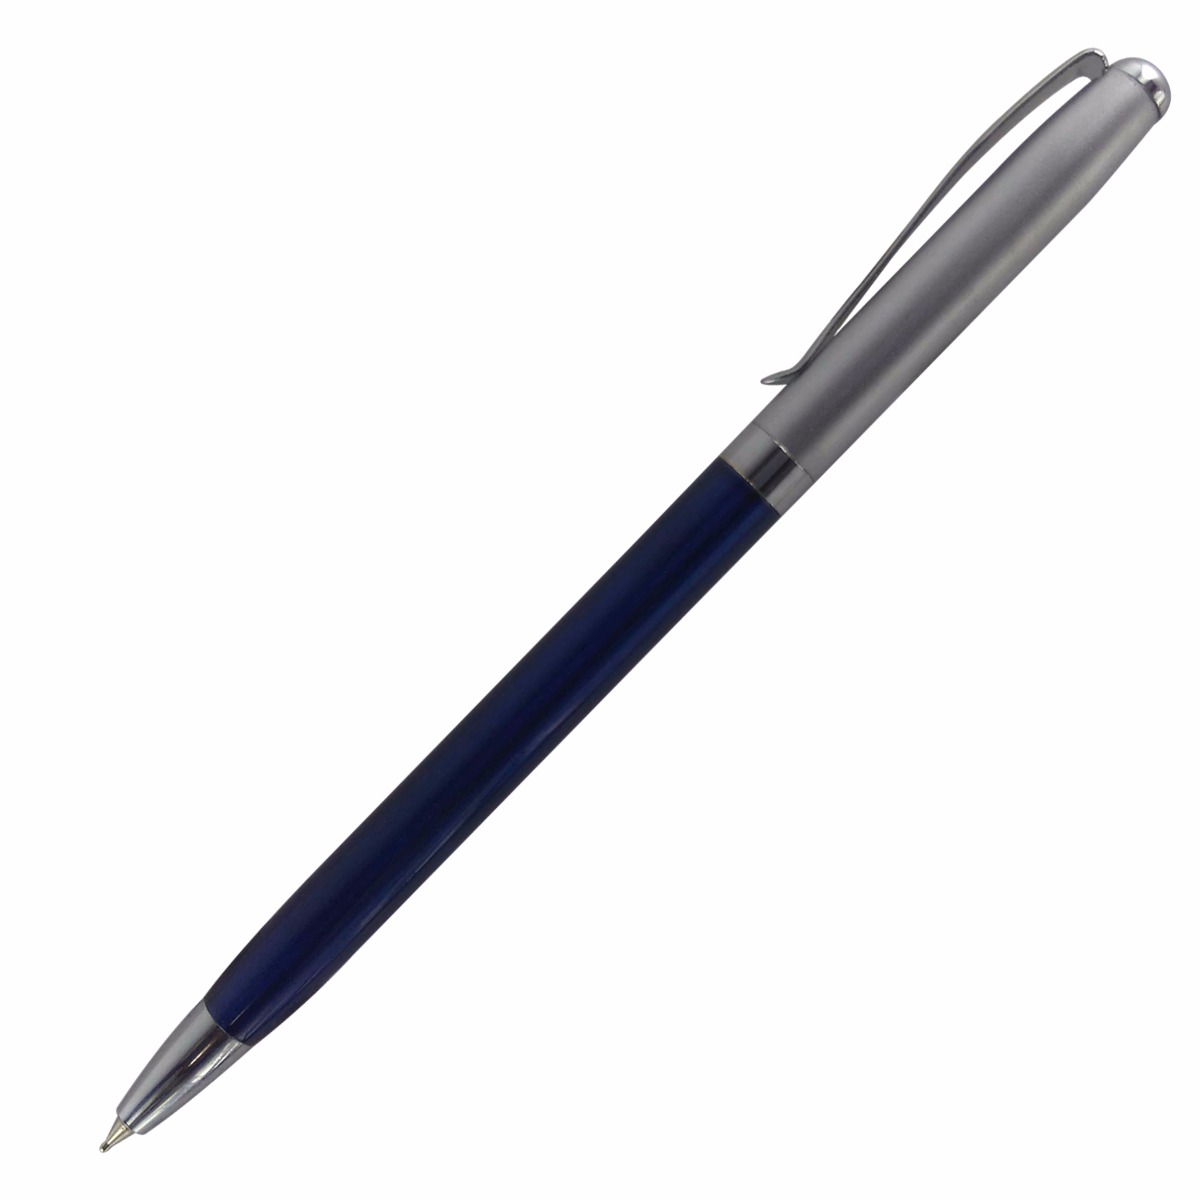 PENHOUSE.IN BLUE COLOR BODY WITH SILVER COLOR CAP TWIST TYPE BALL PEN MODEL: 13068